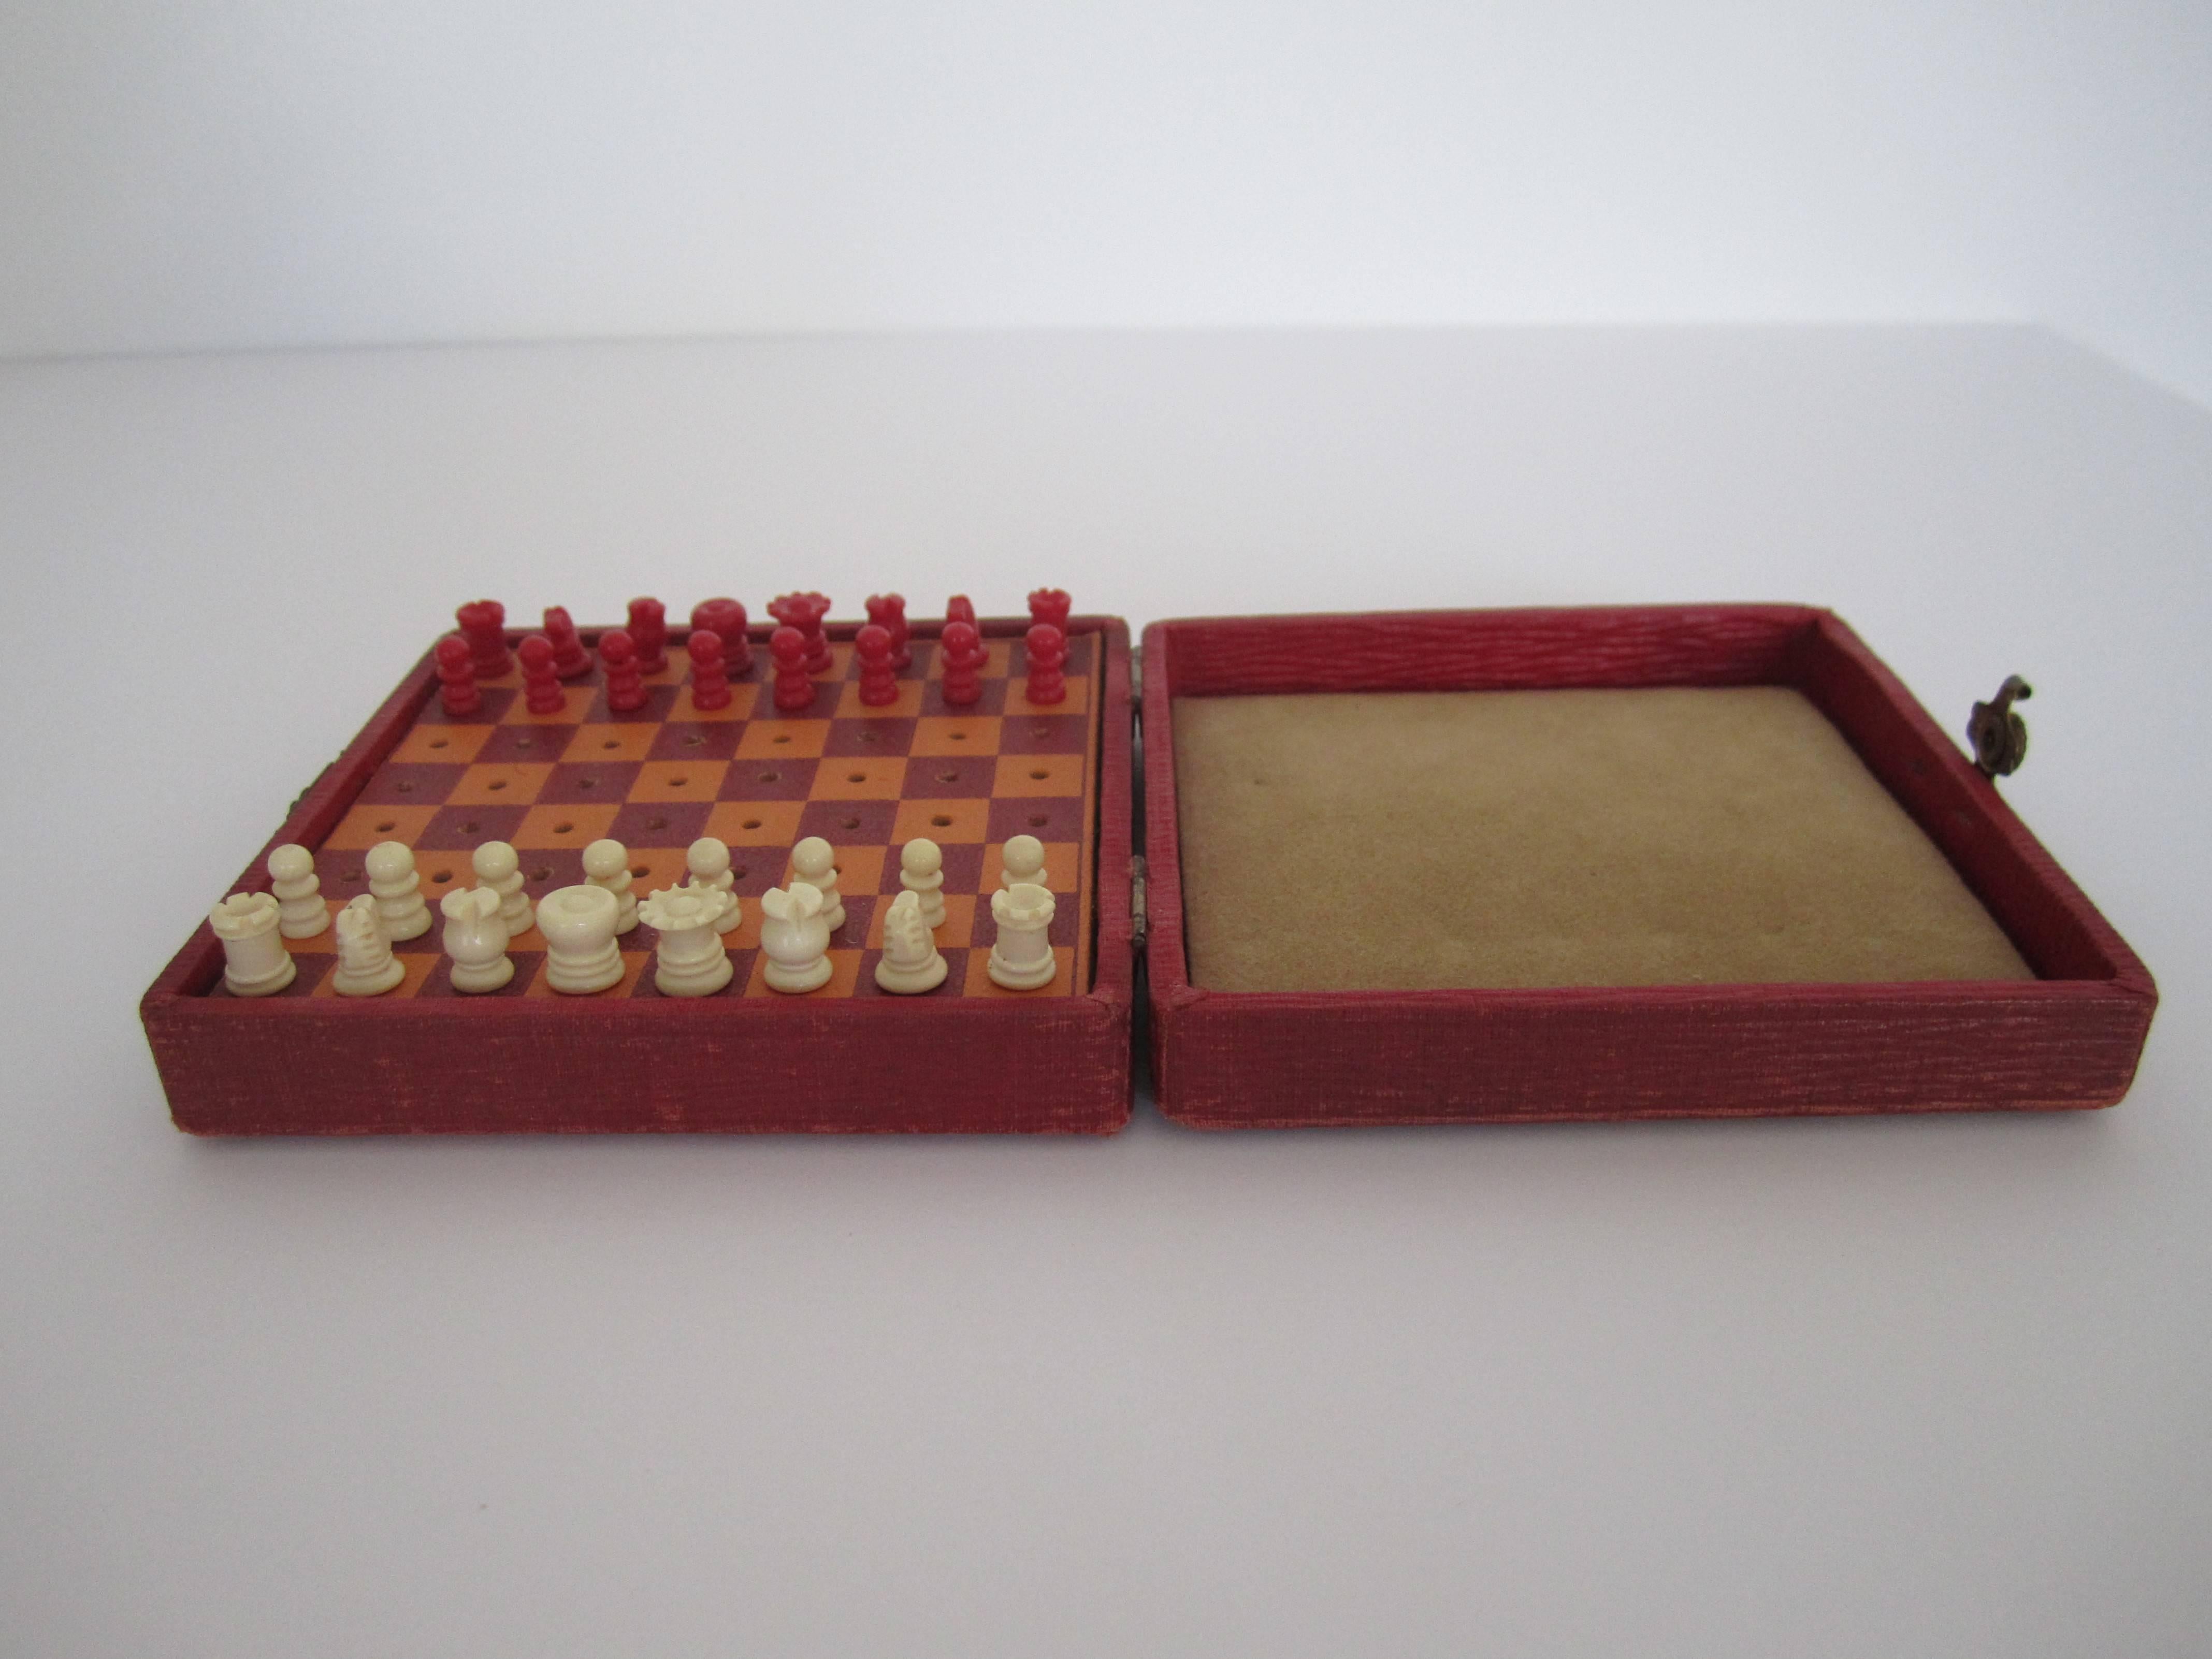 A mini travel chess game set with red and cream (white) pieces all beautifully carved and solid. Box has clasp that snaps closed comfortably. Circa 1920s. 

Measurements closed: 4 in. x4 in. x 1.75 in.
Measurements open: 4 in. x 8 in. x .75